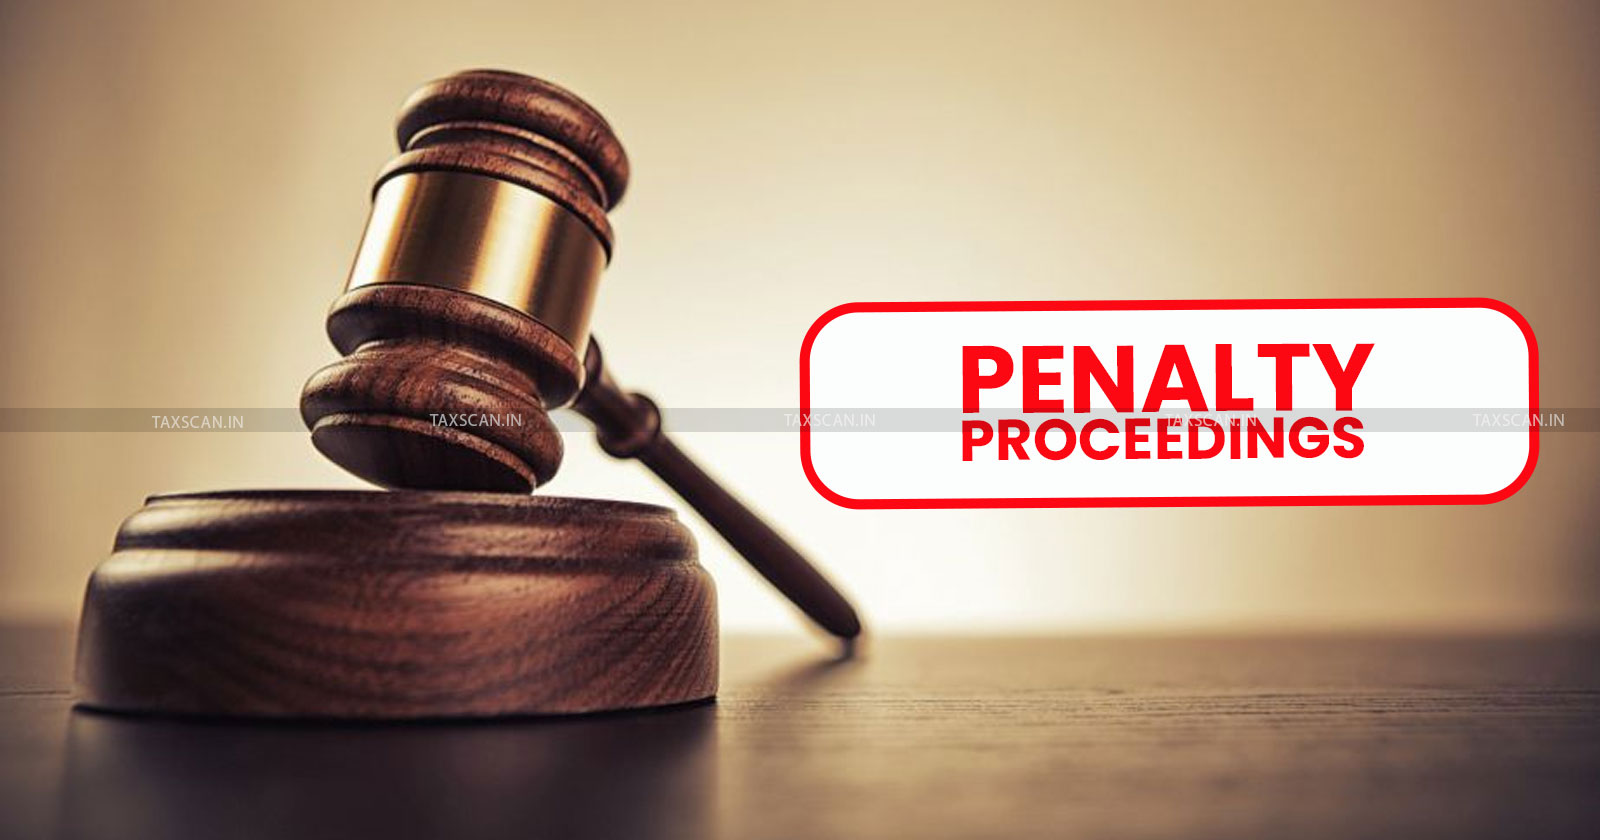 Income Tax penalty revision - Kerala High Court - Assessment Order - Penalty proceedings revision - Penalty - taxscan